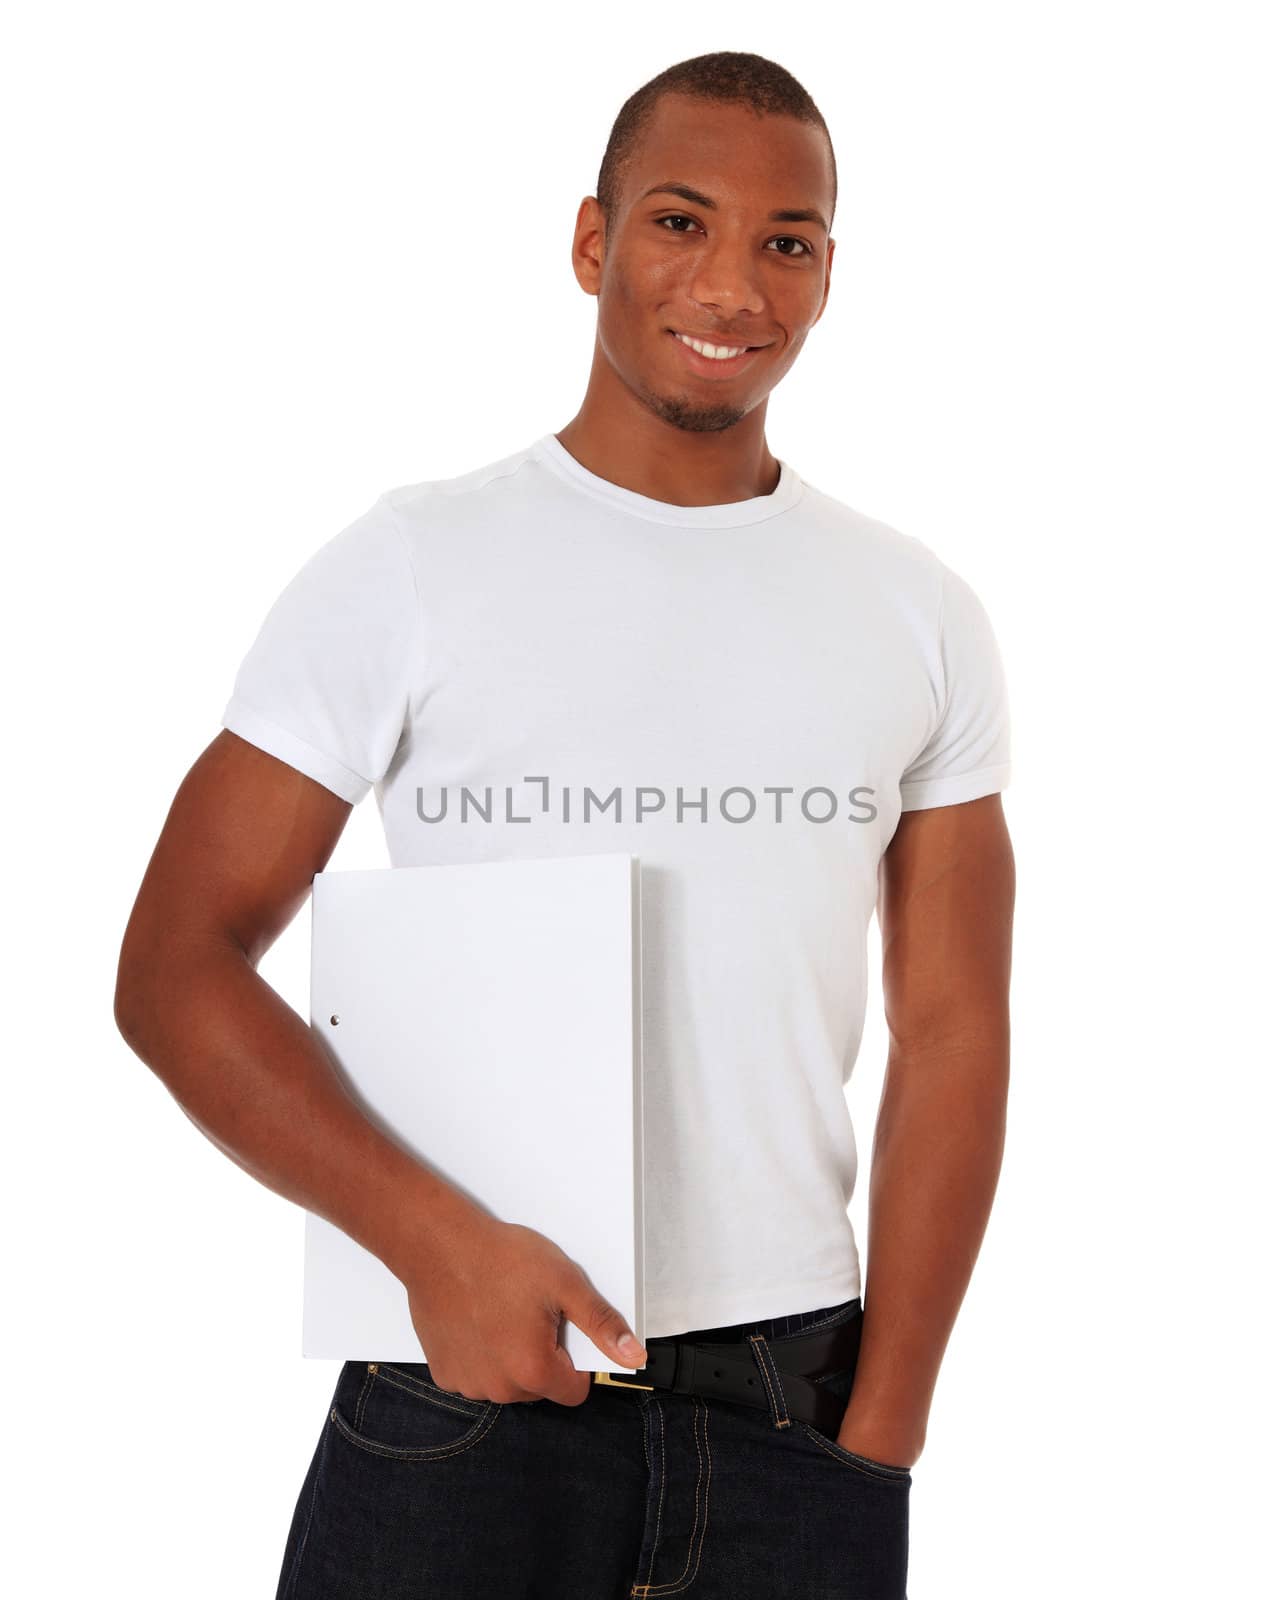 Attractive black student. All on white background.